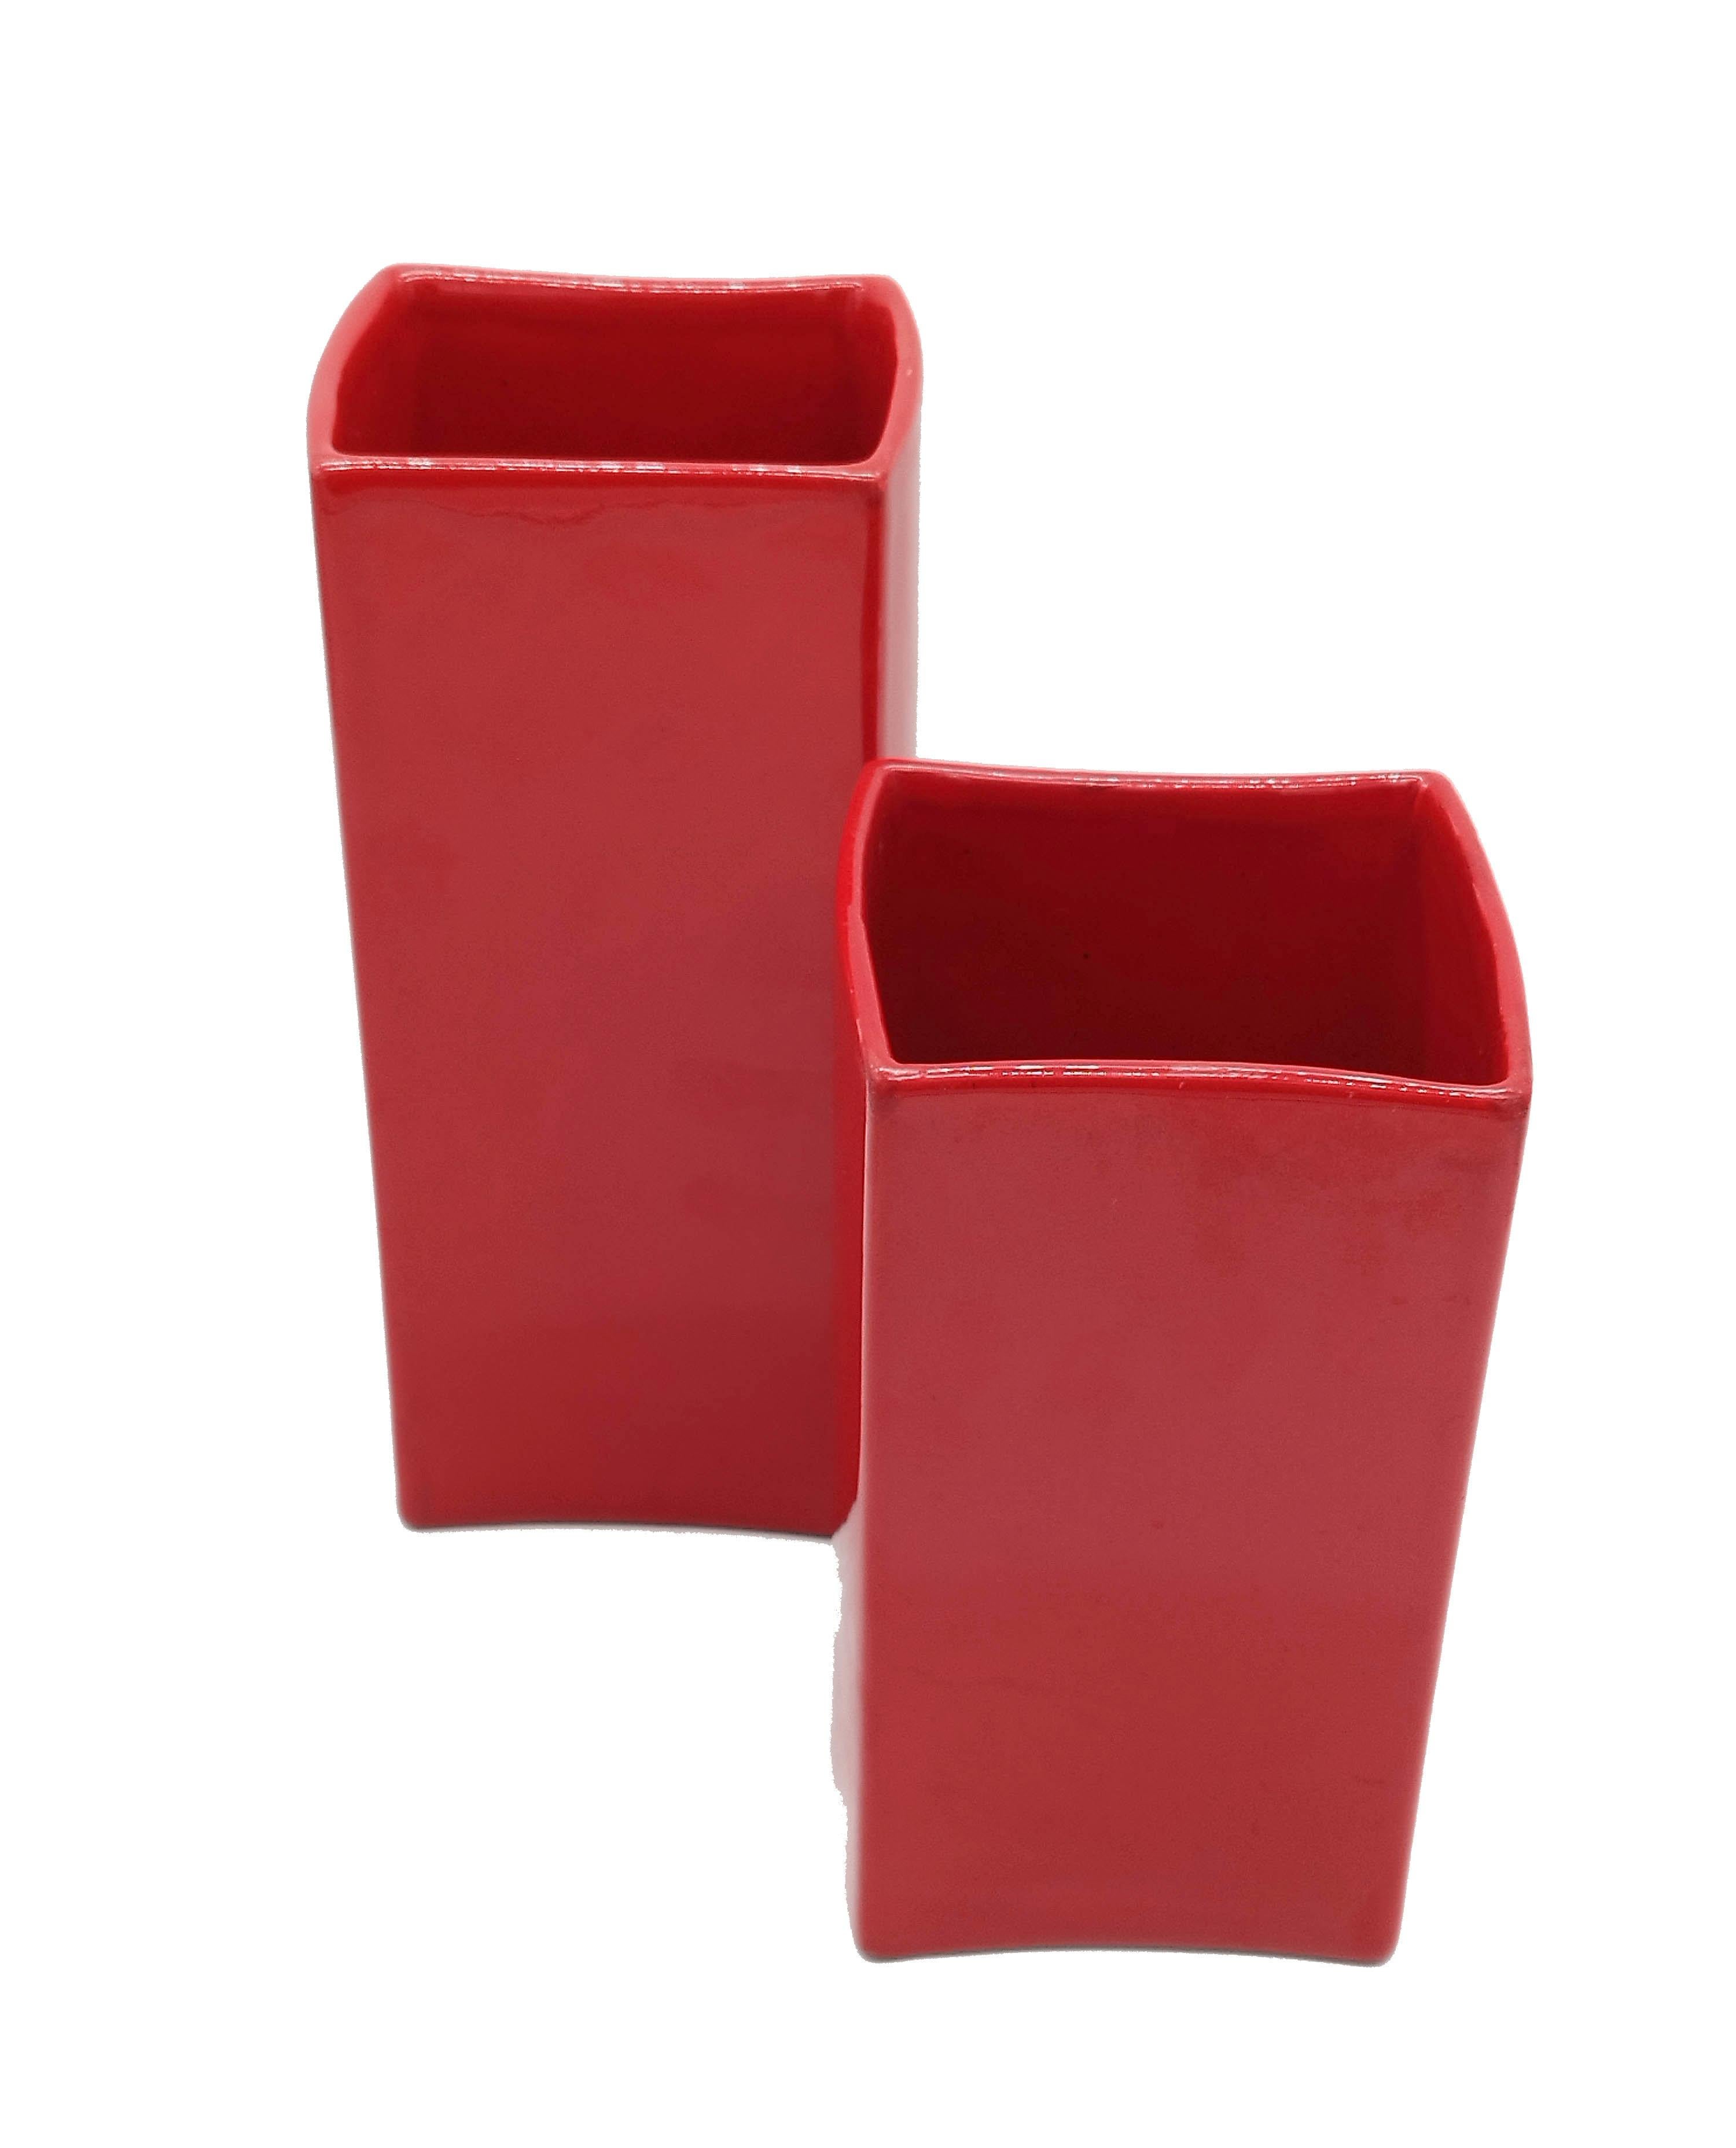 Mid-Century Modern Franco Bettonica for Gabbianelli Set of Two Red Ceramic Vases, Italy 1970s